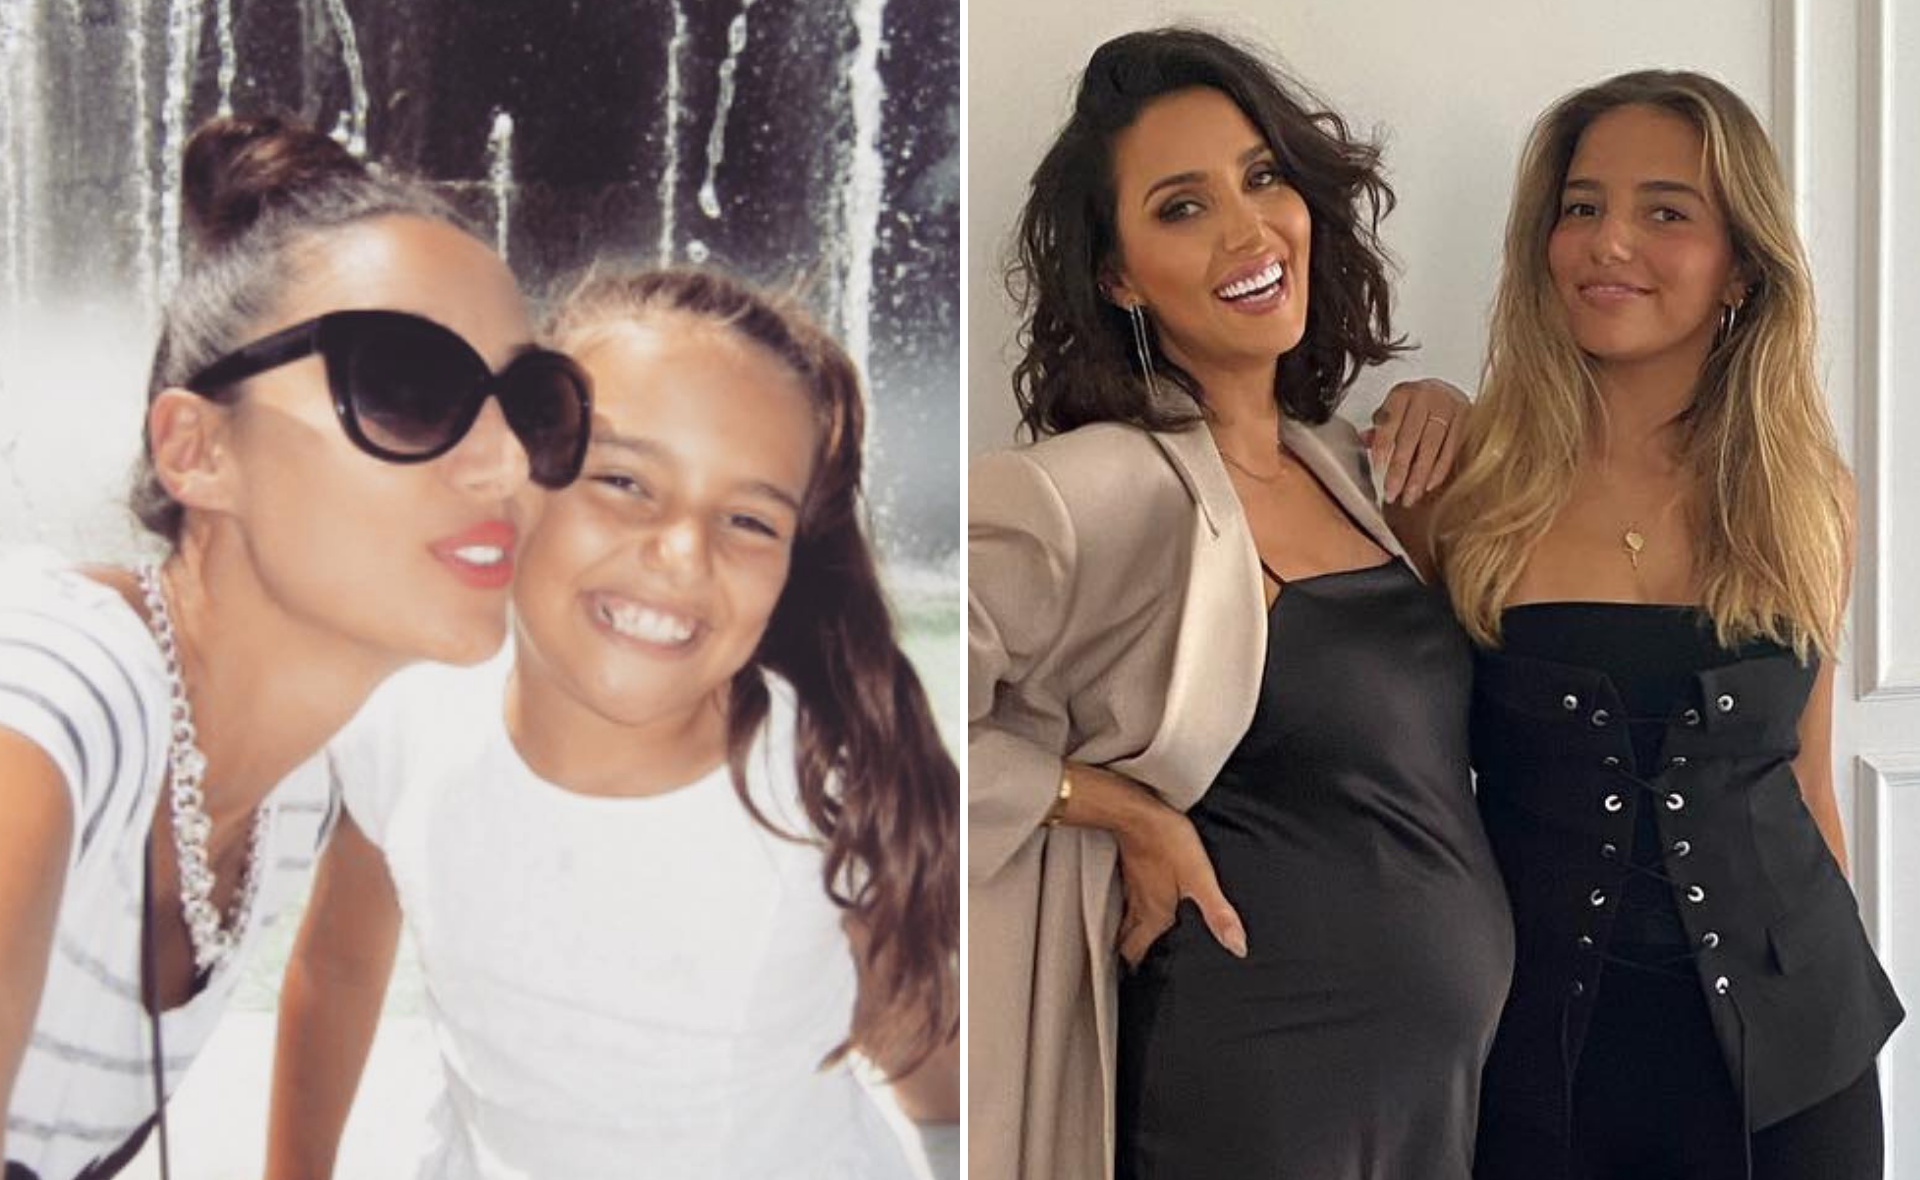 These photos prove Snezana Wood’s bond with her eldest daughter Eve is stronger than anyone knows